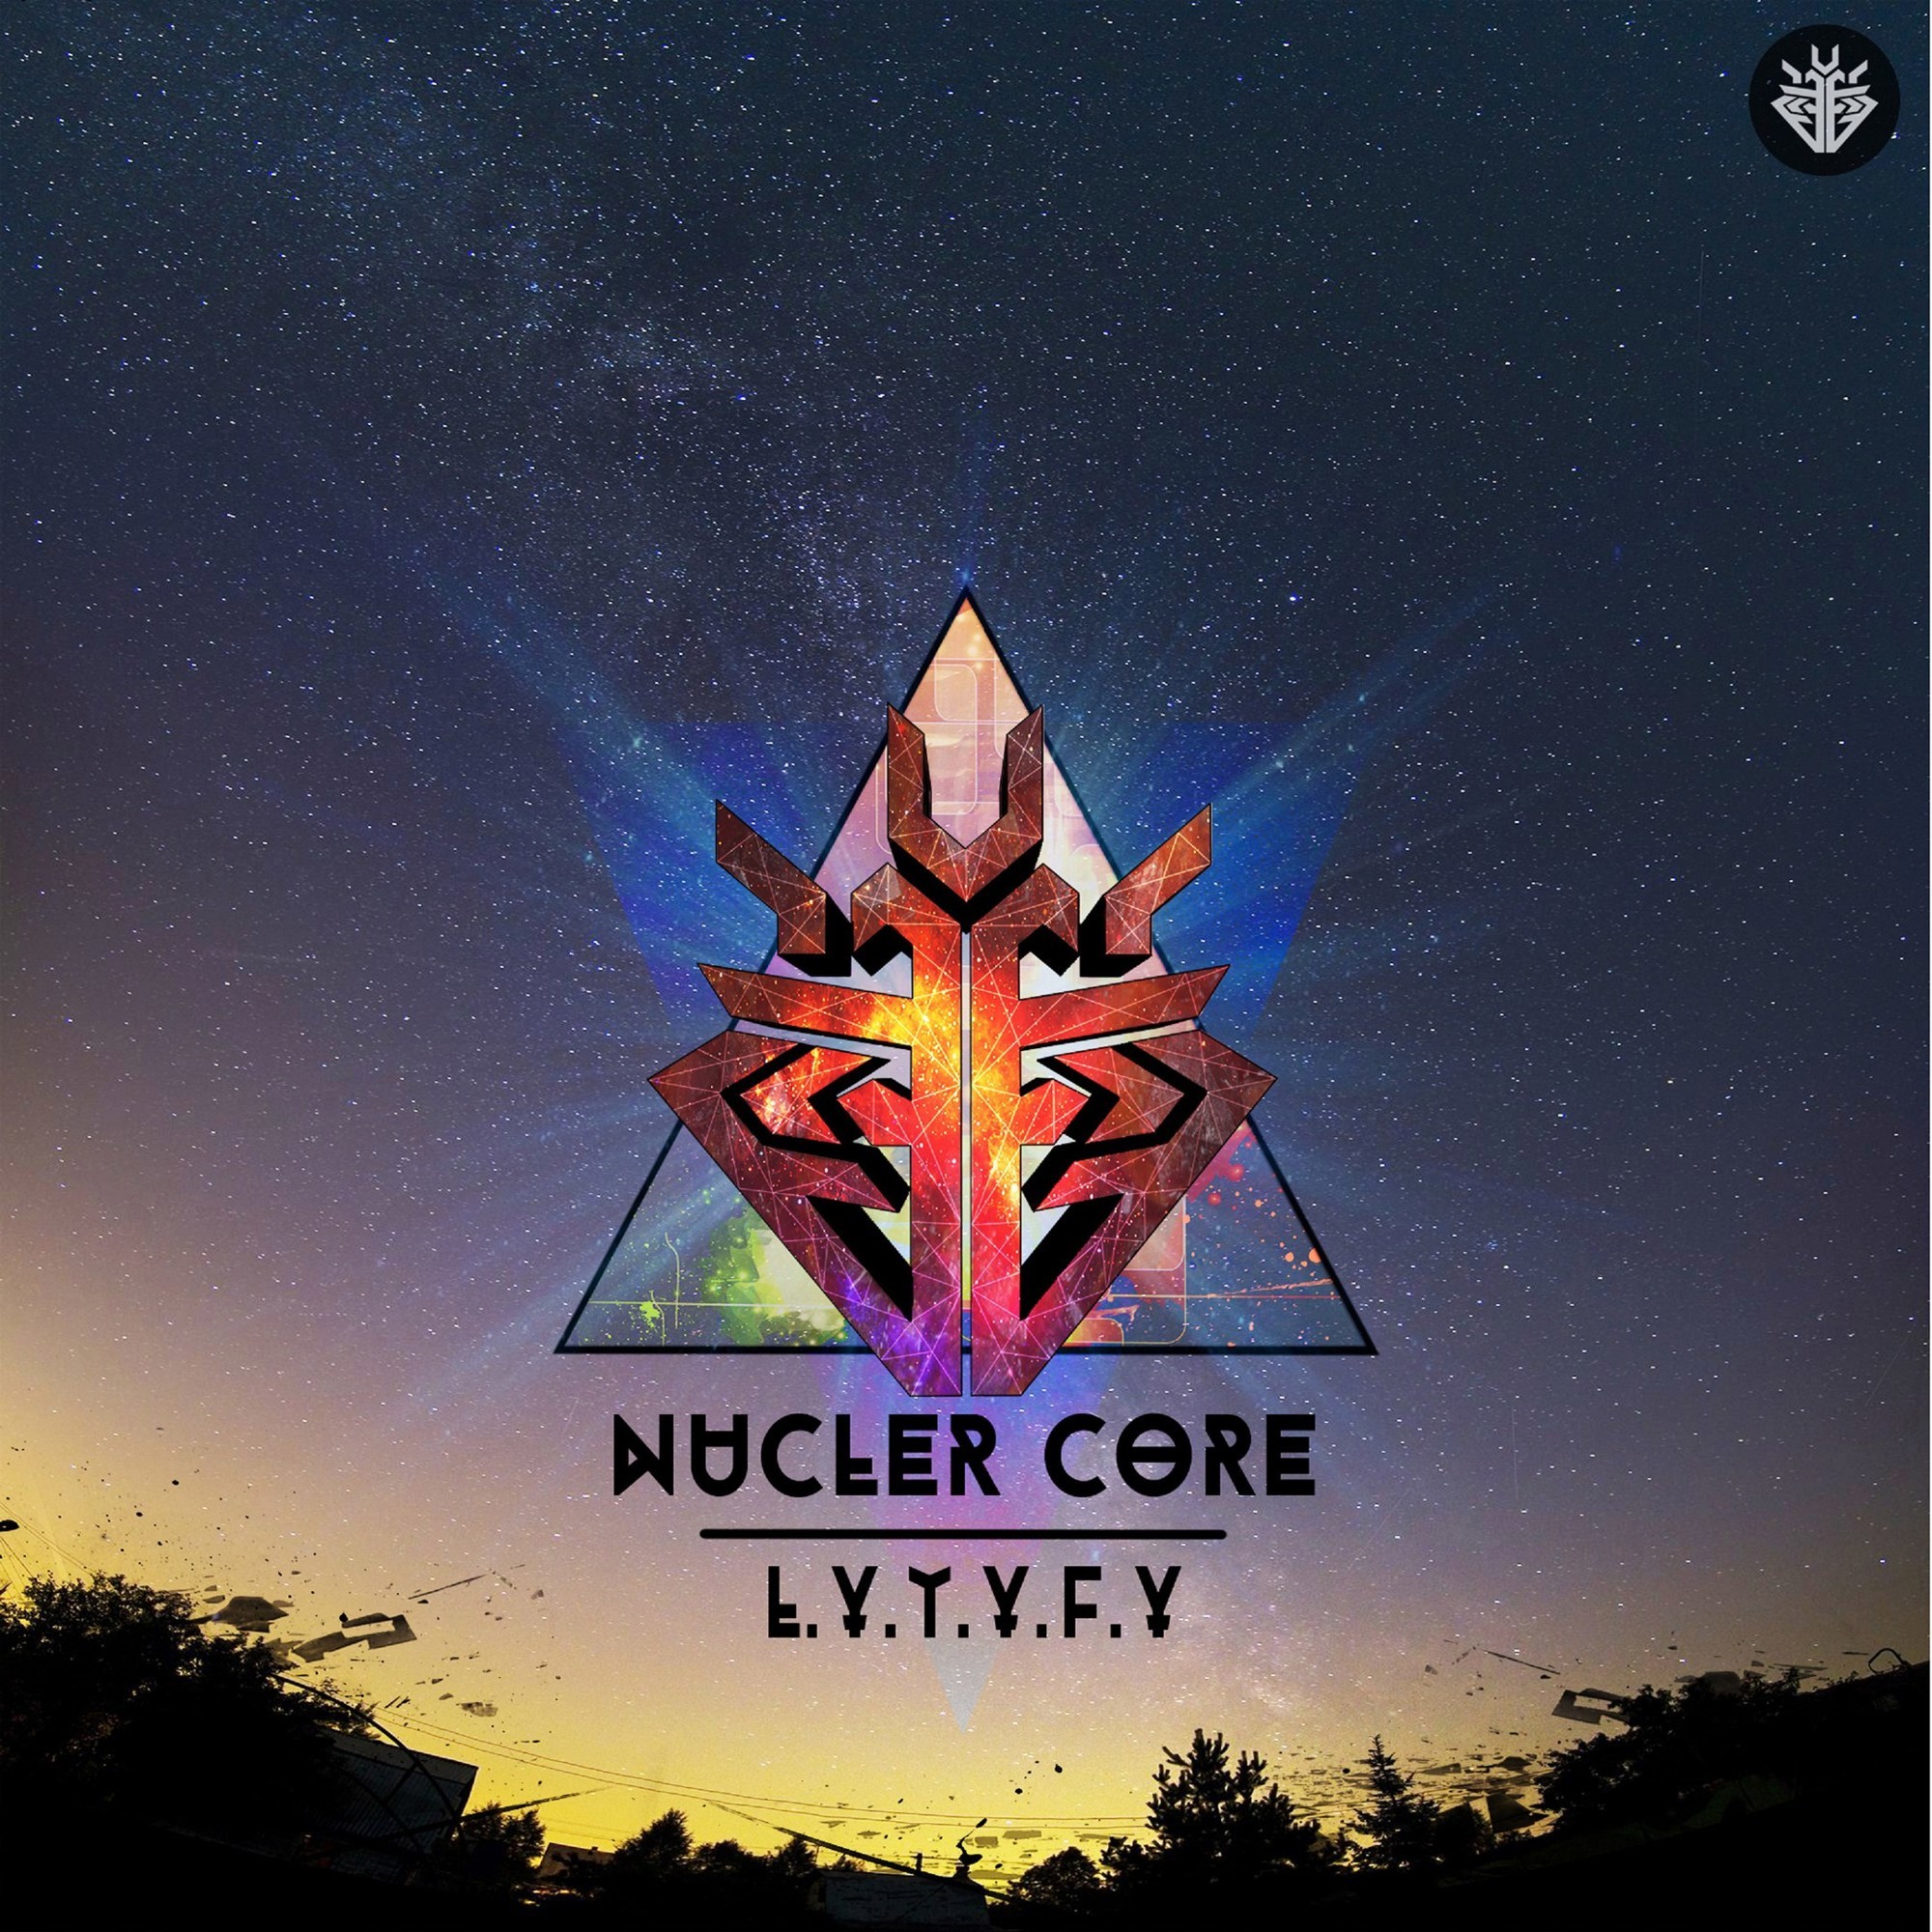 Only core. Nuclear Core.